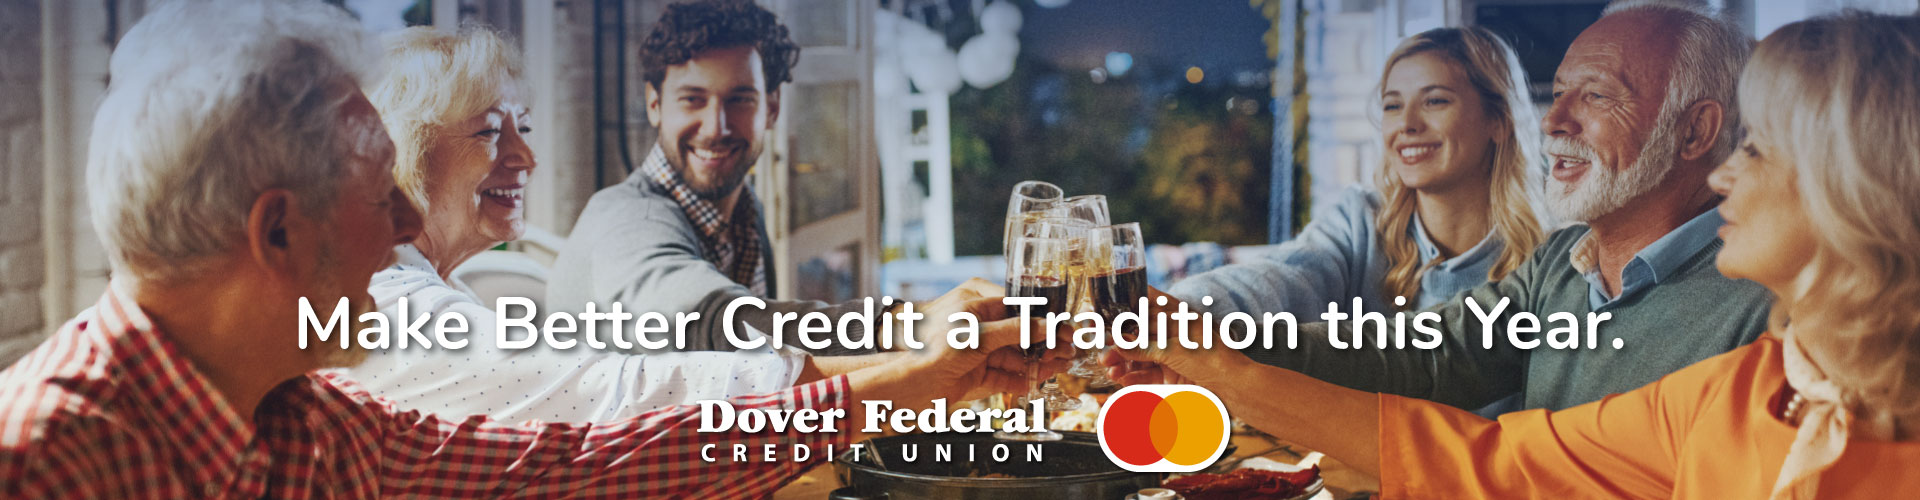 Make Better Credit a Tradition this Year.